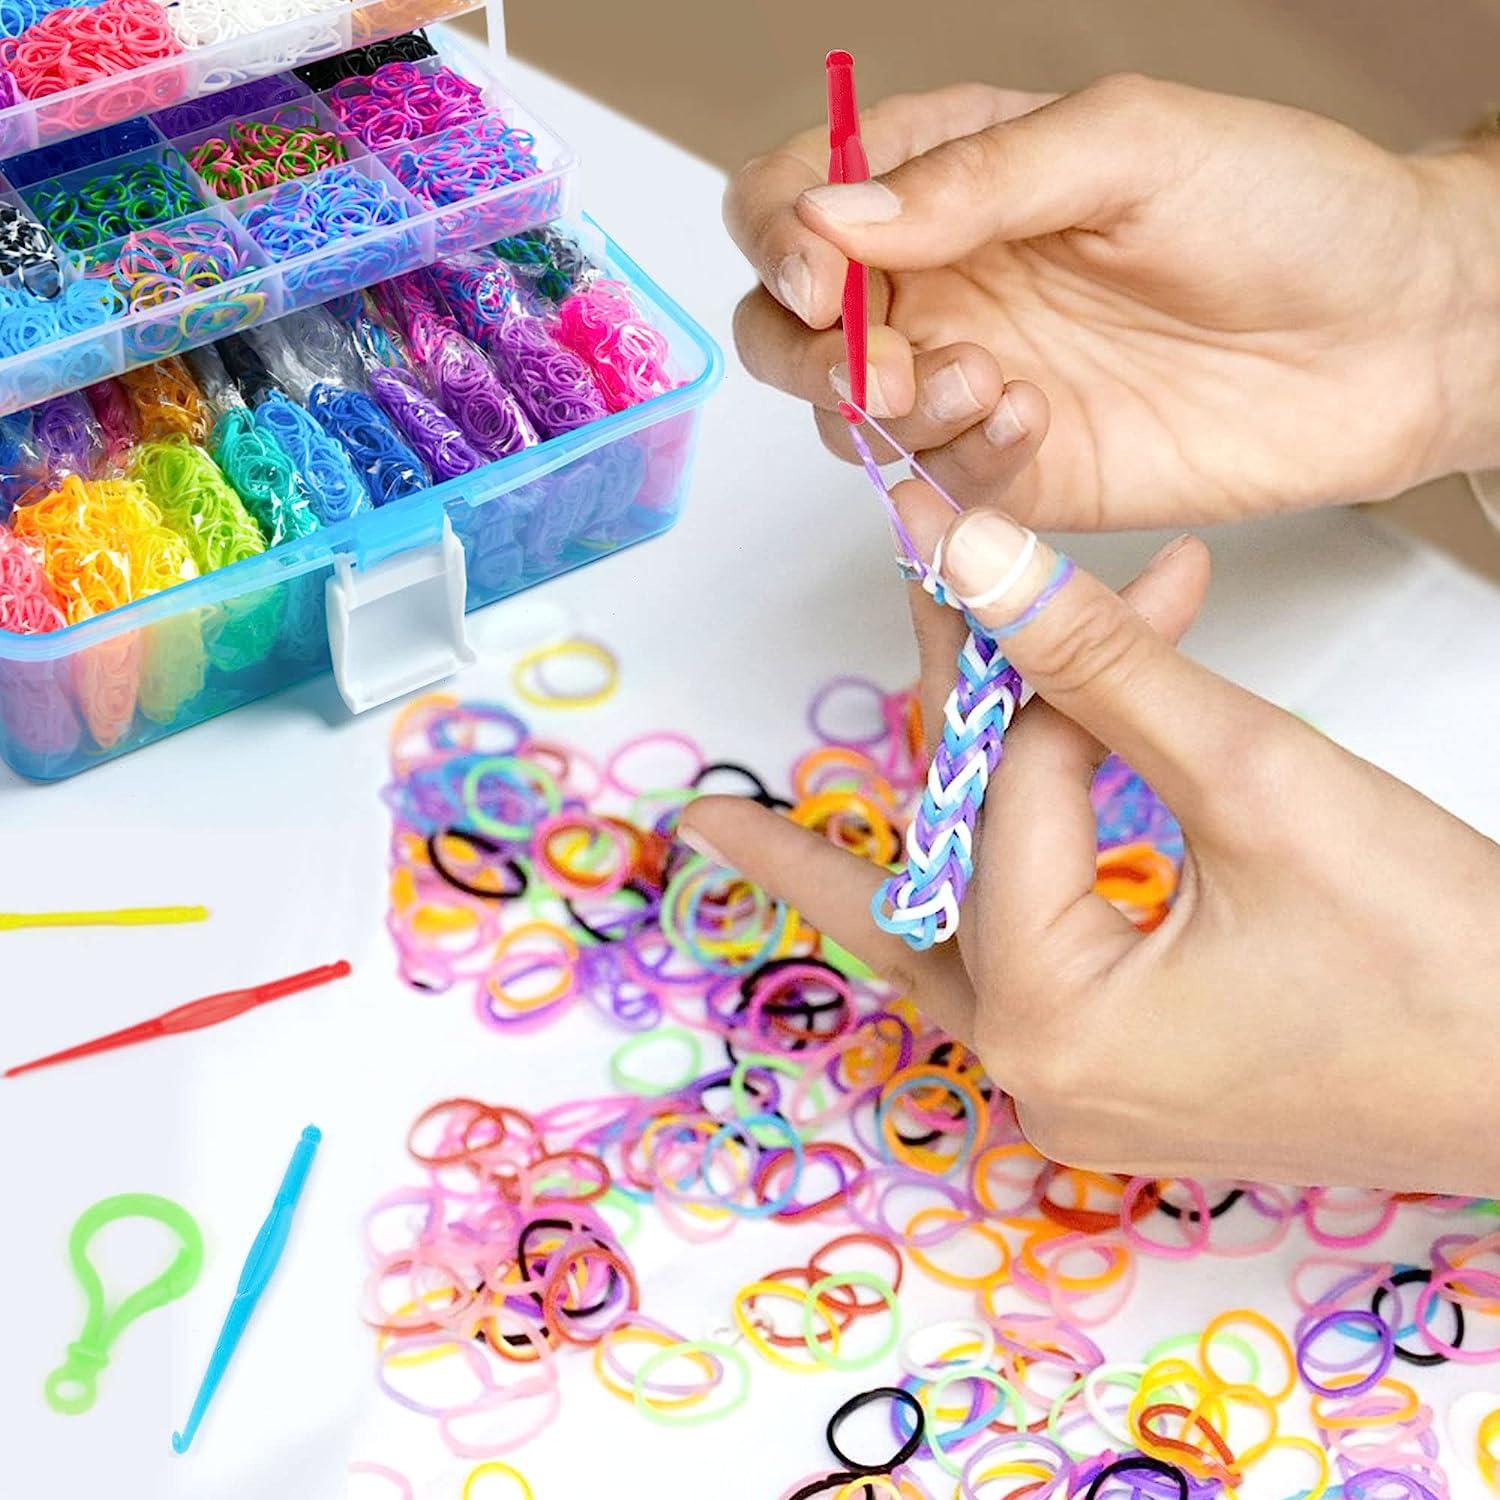 Inscraft 11880+ Loom Bands Set: Colorful Rubber Bands in 28 Colors with Container, 600 Clips, 200 Beads, 52 ABC Beads, Premium Bracelet Making